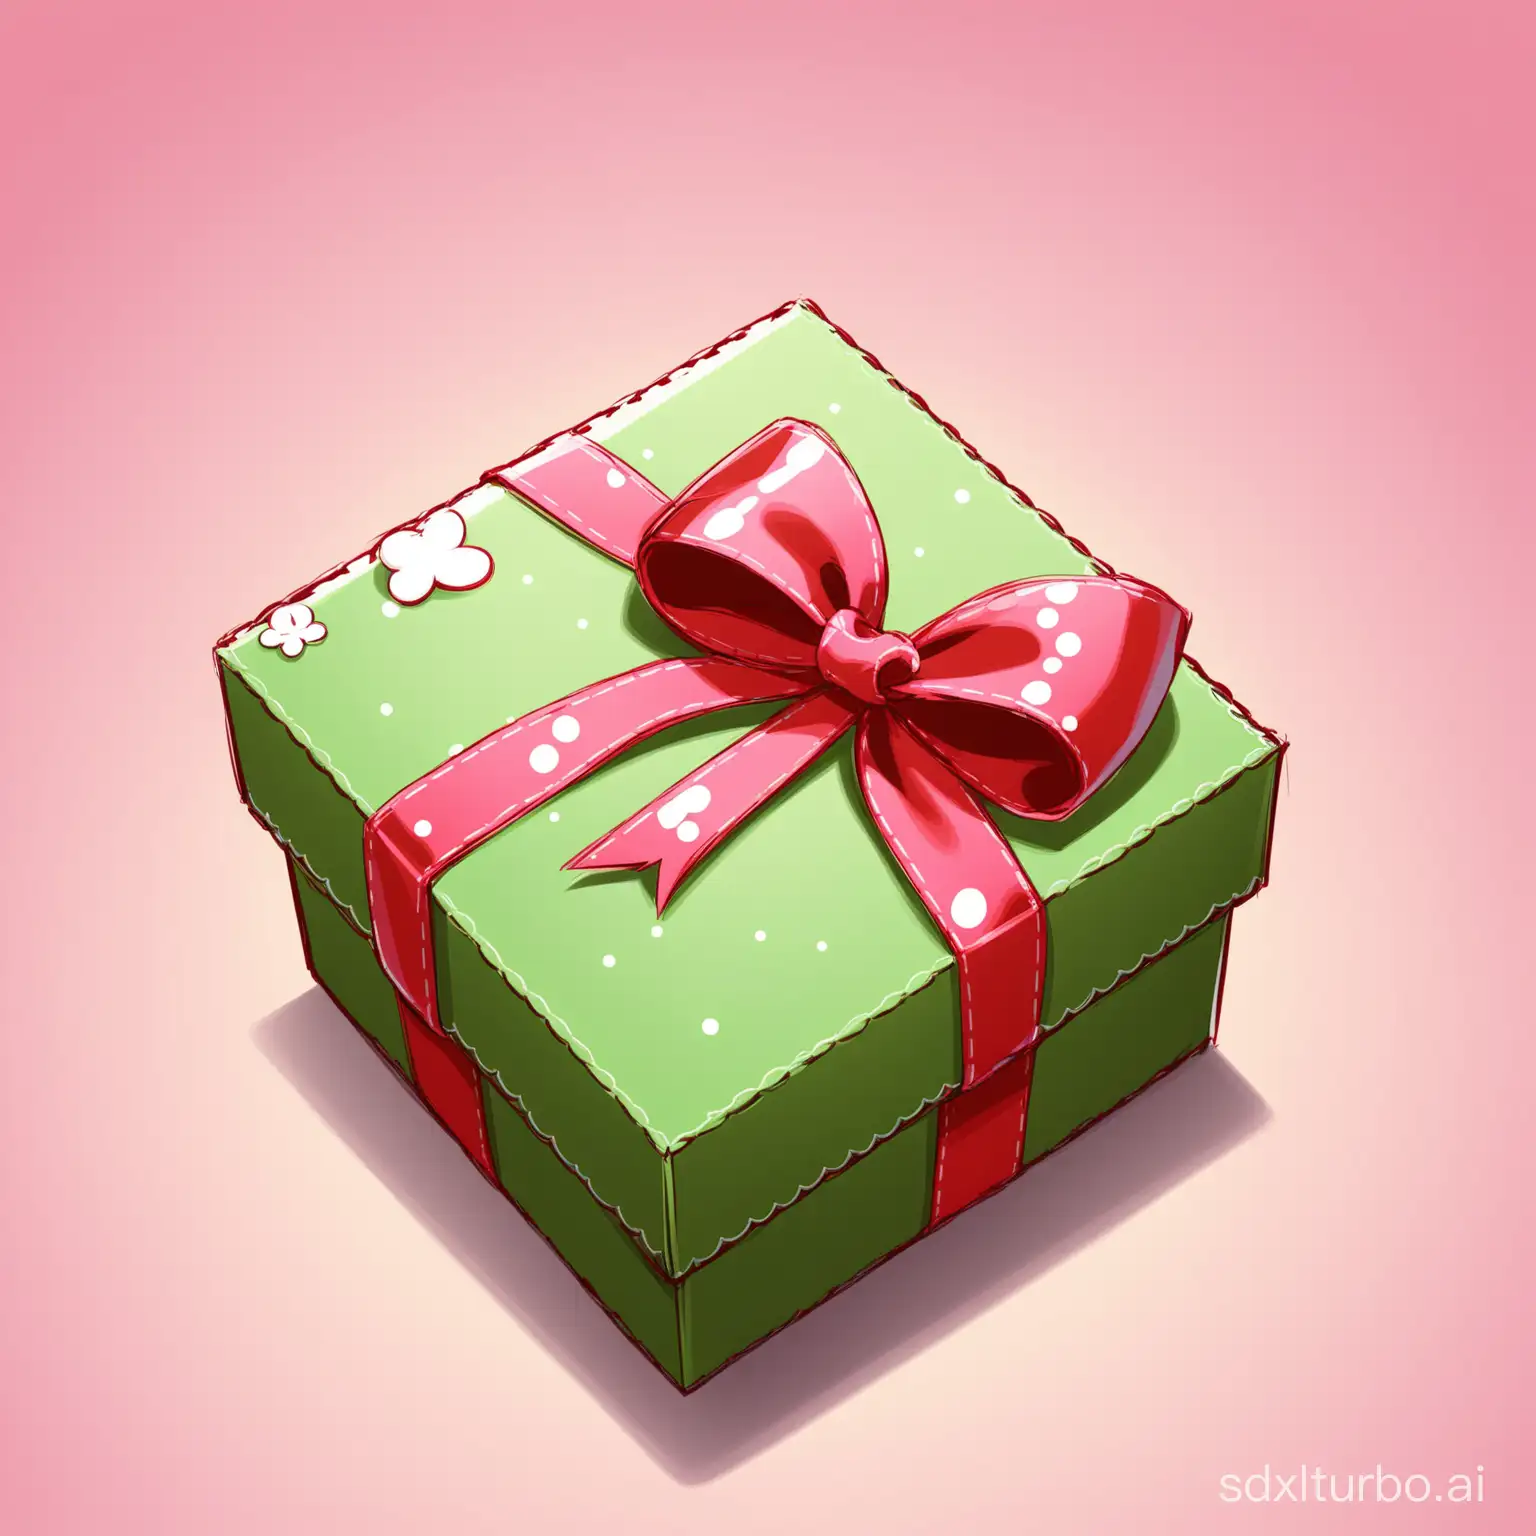 Cheerful-Cartoon-Small-Gift-Box-Surrounded-by-Festive-Accents